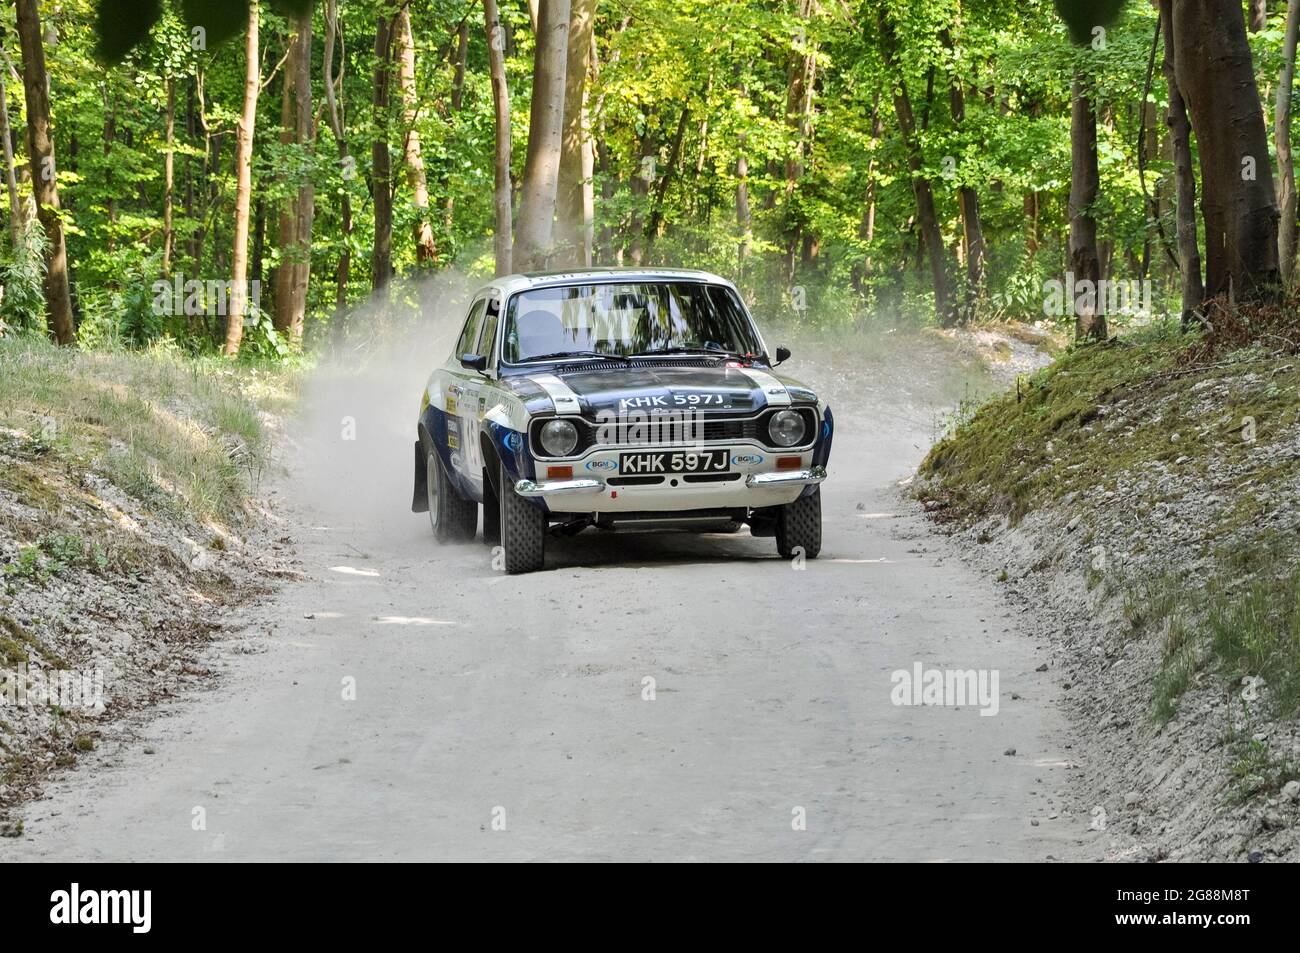 Classic Ford Escort RS1600 Mk1 rally car racing on the rally stage at the Goodwood Festival of Speed 2013. Historic rallying through forest stage Stock Photo